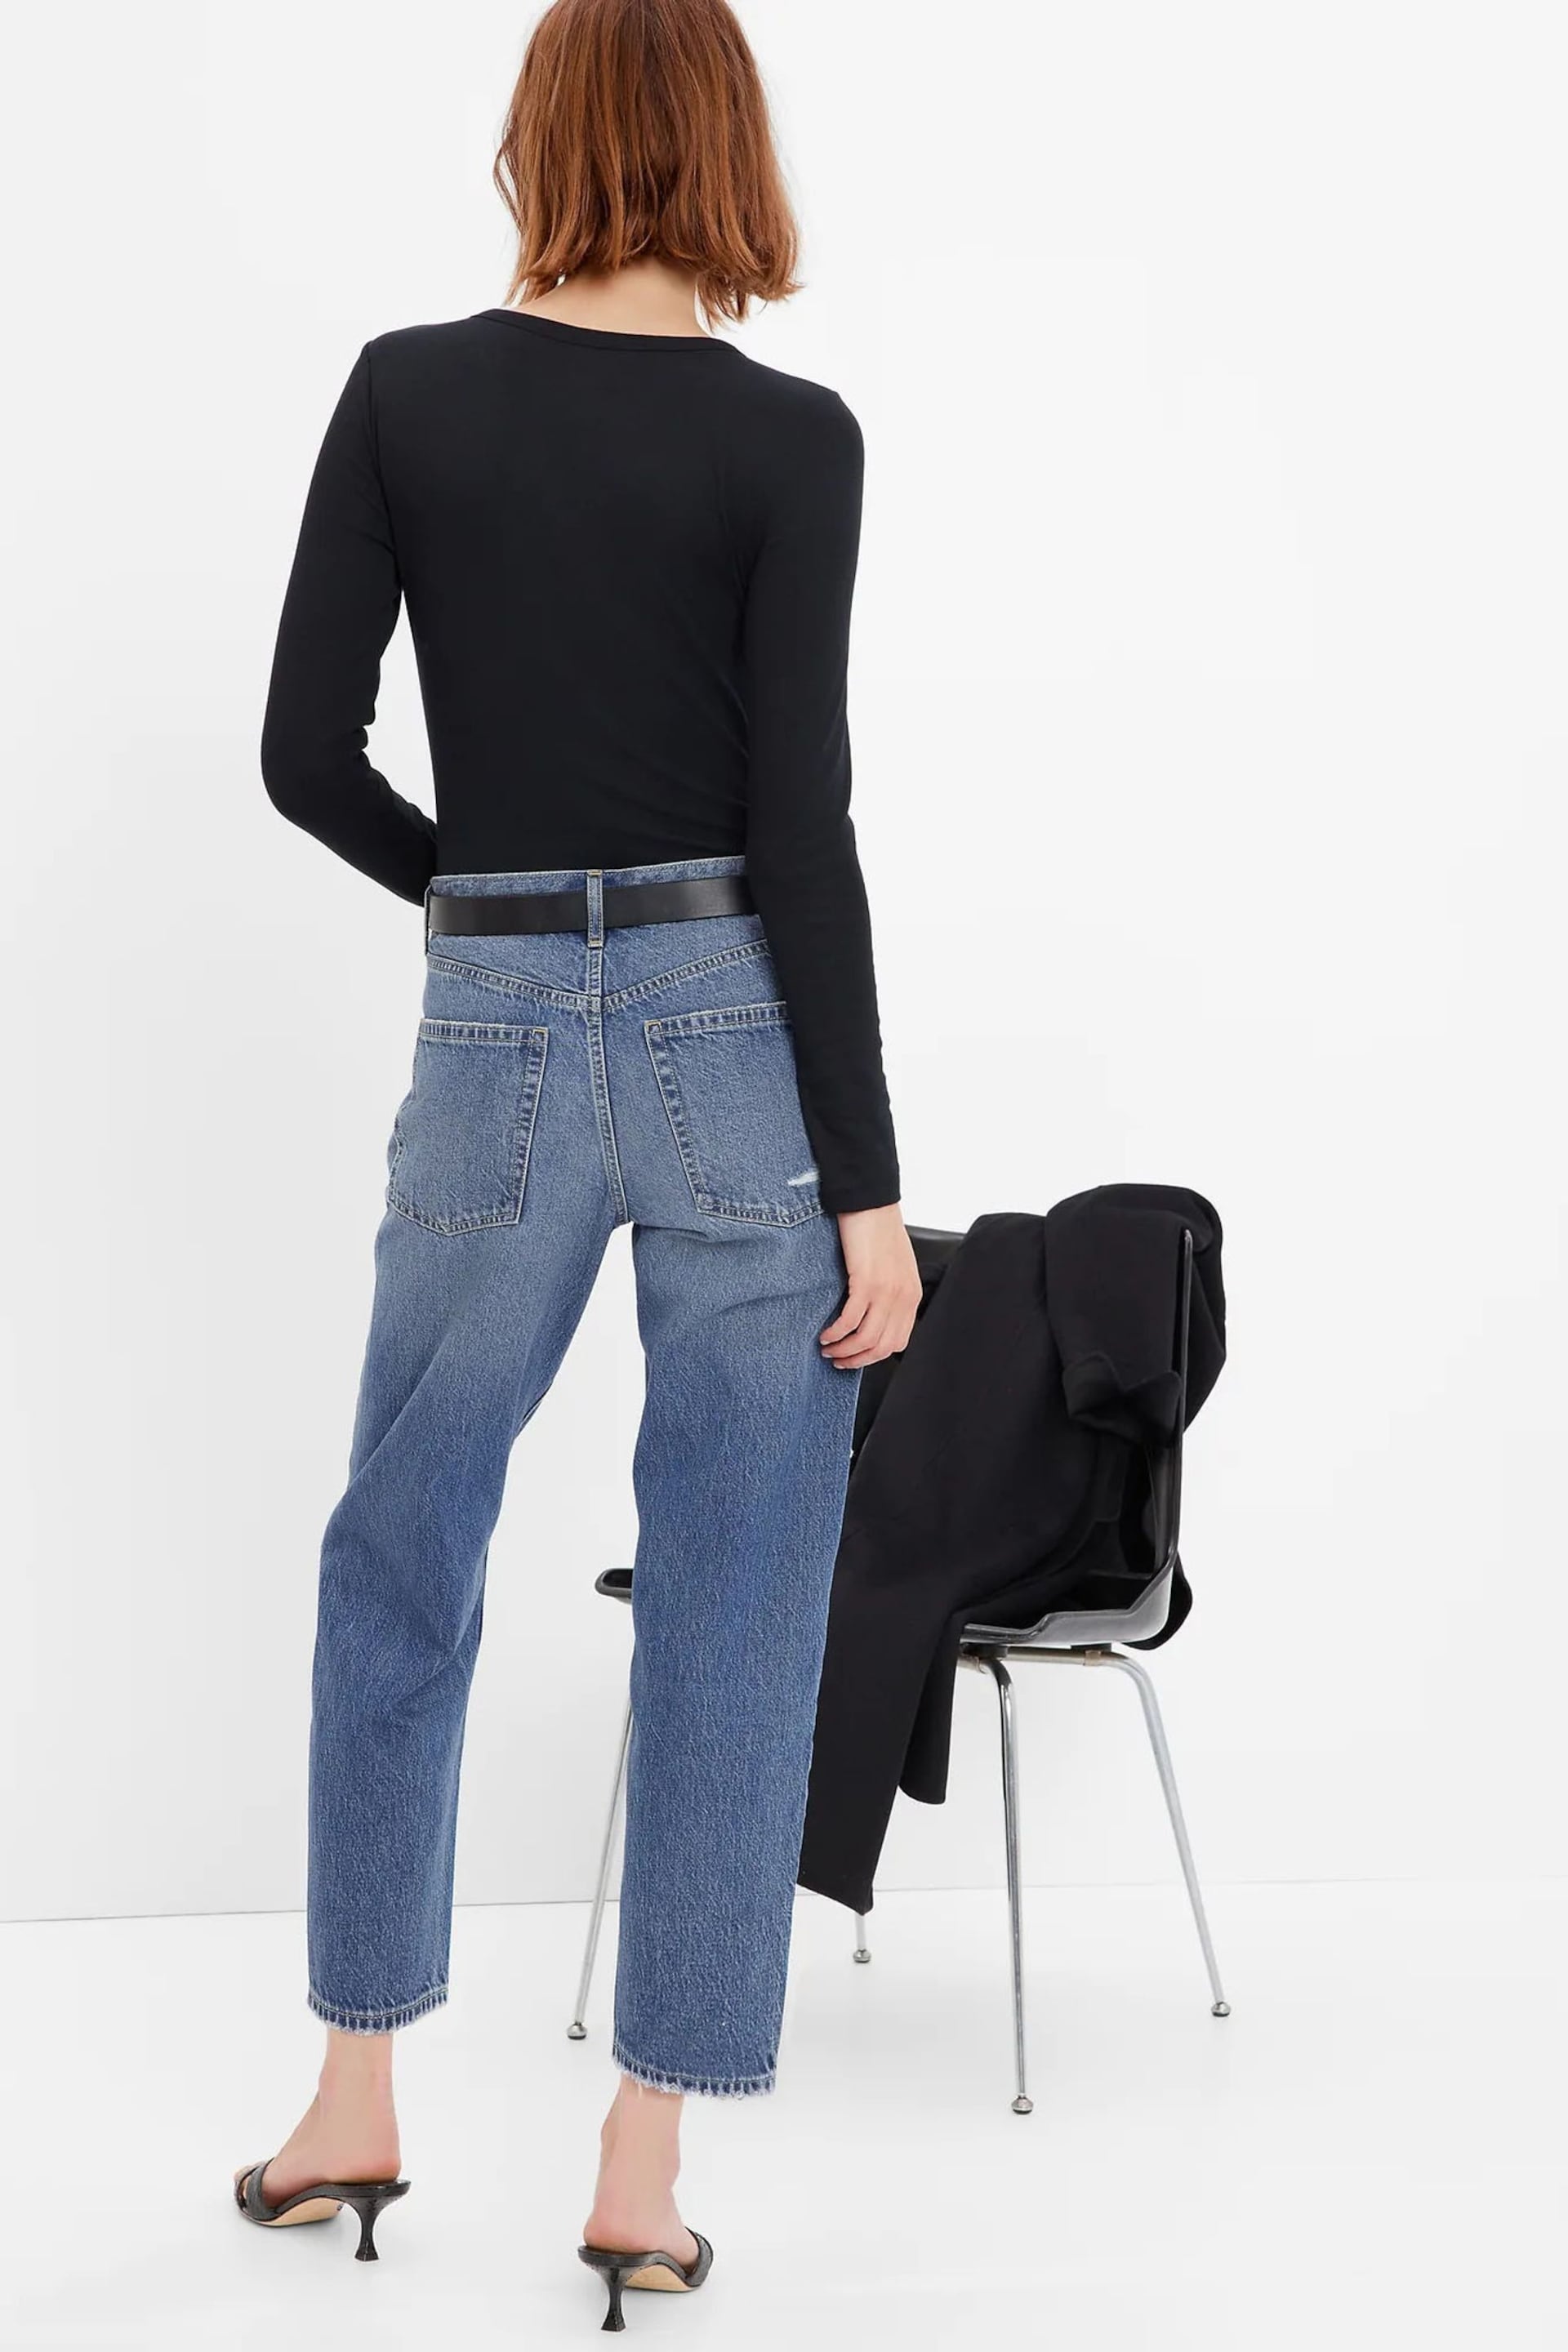 Gap Mid Wash Blue High Waisted Ripped Mom Jeans - Image 2 of 4